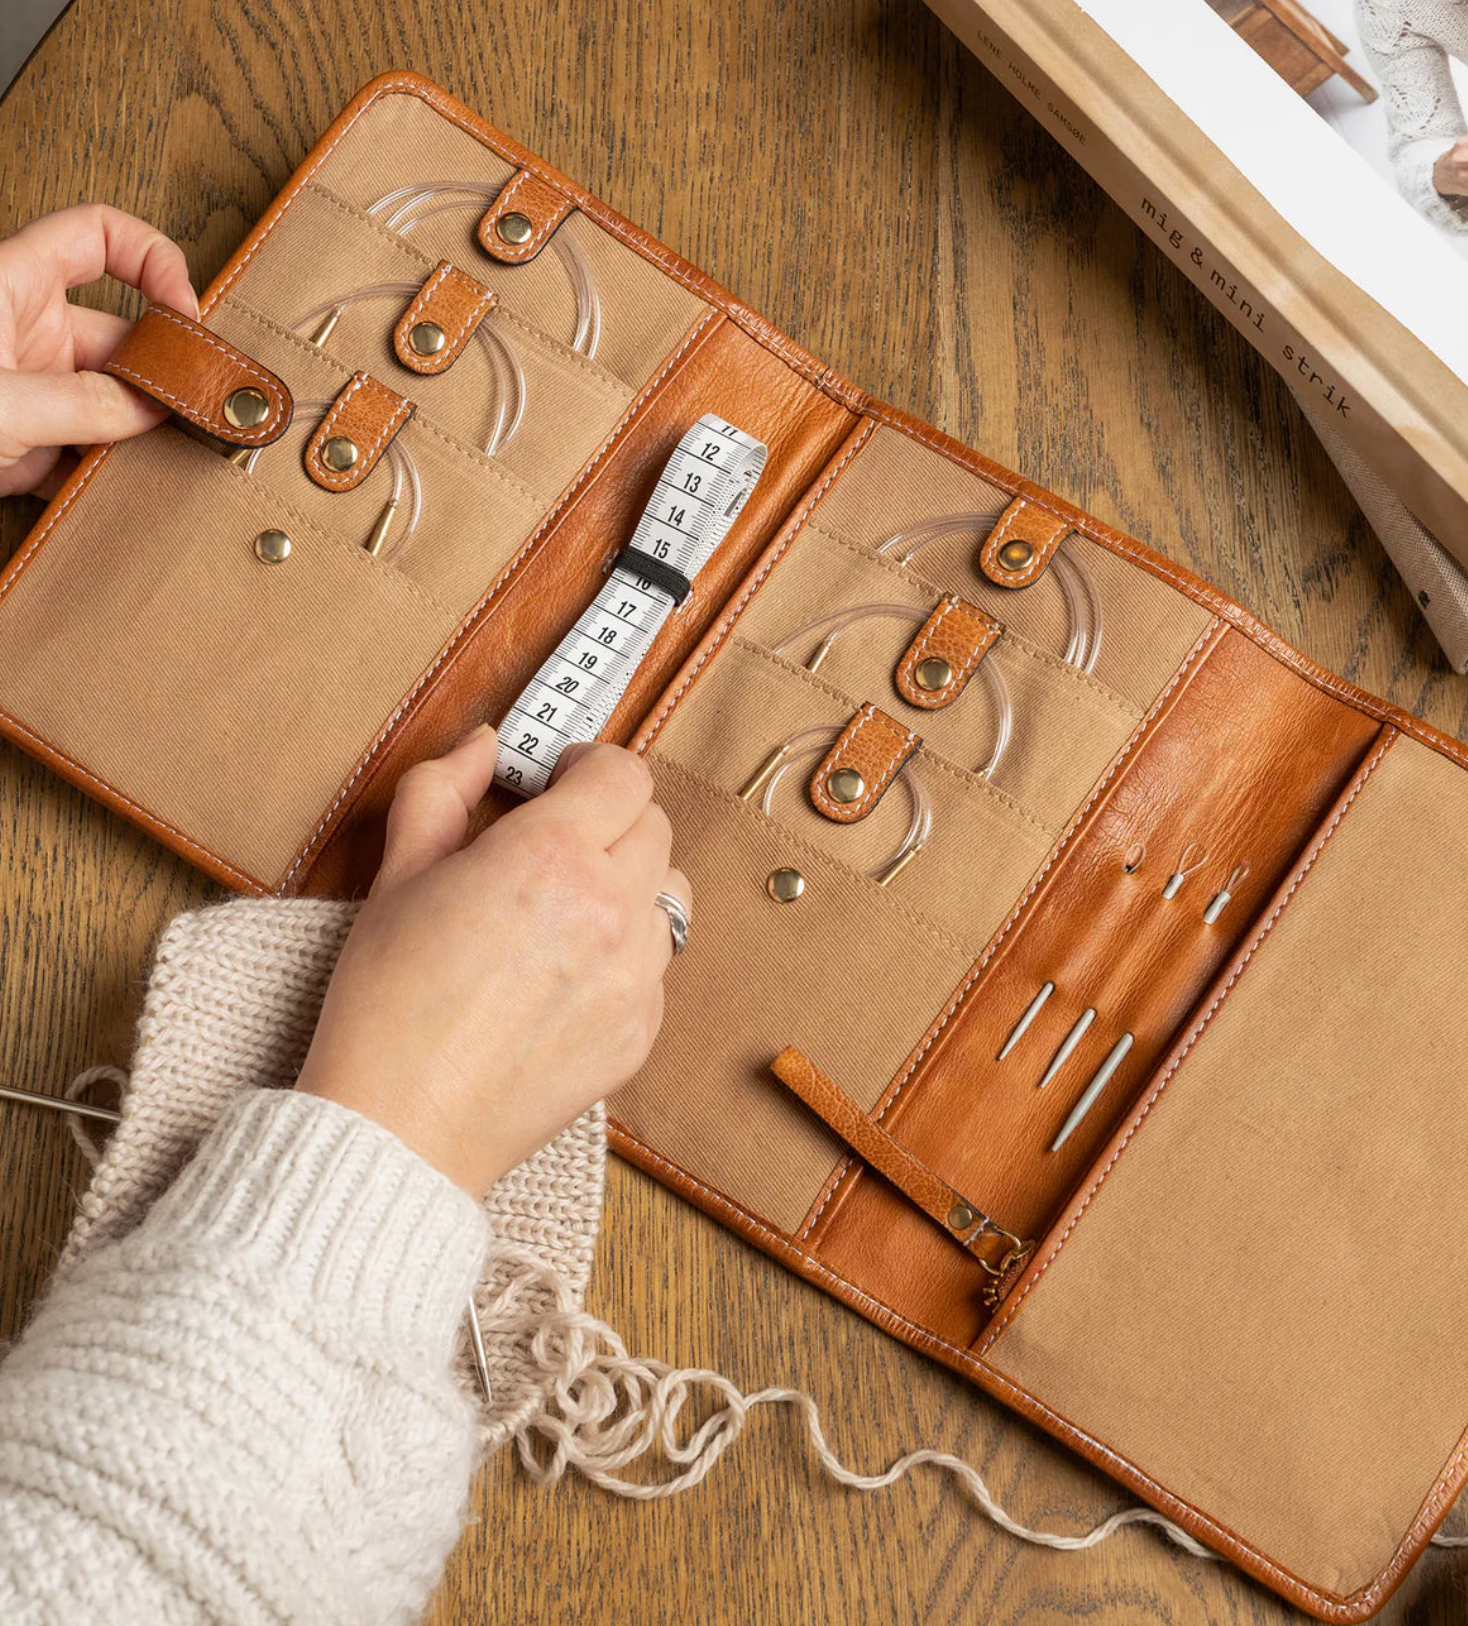 PREORDER DUE AUGUST- Re:designed PROJECT 7 - Leather Needle Organiser